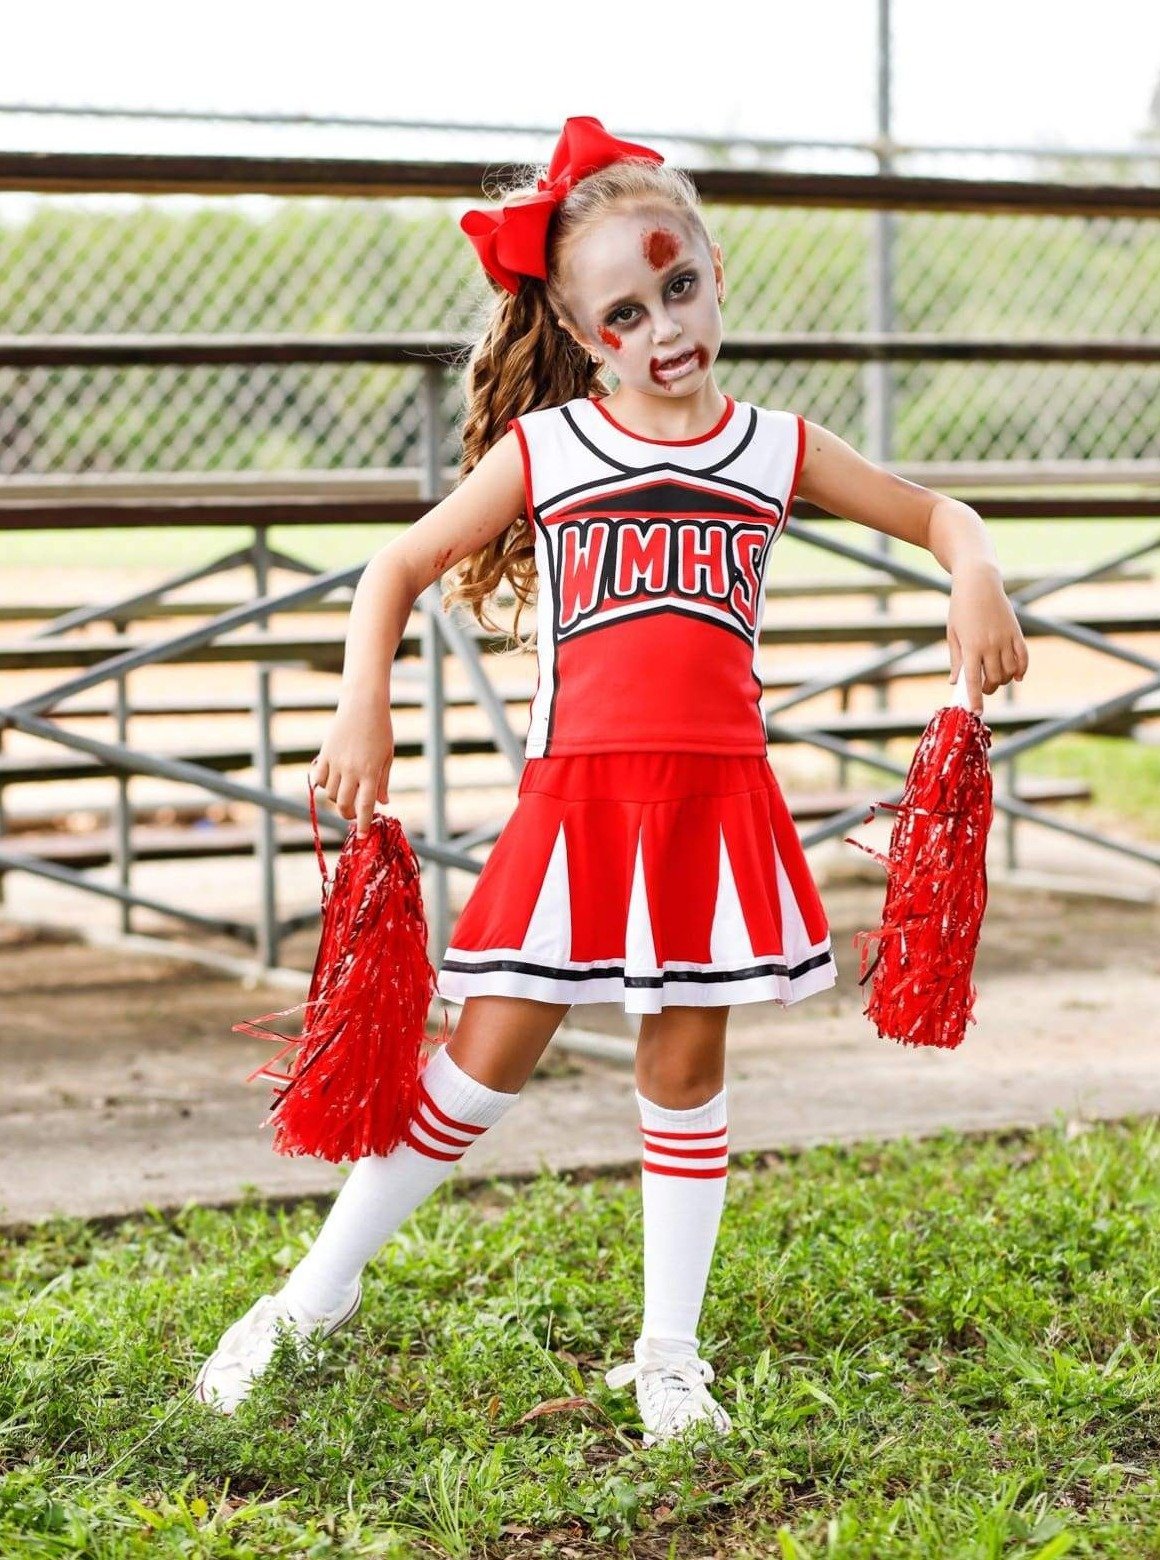 How to be a zombie cheerleader for halloween | gail's blog